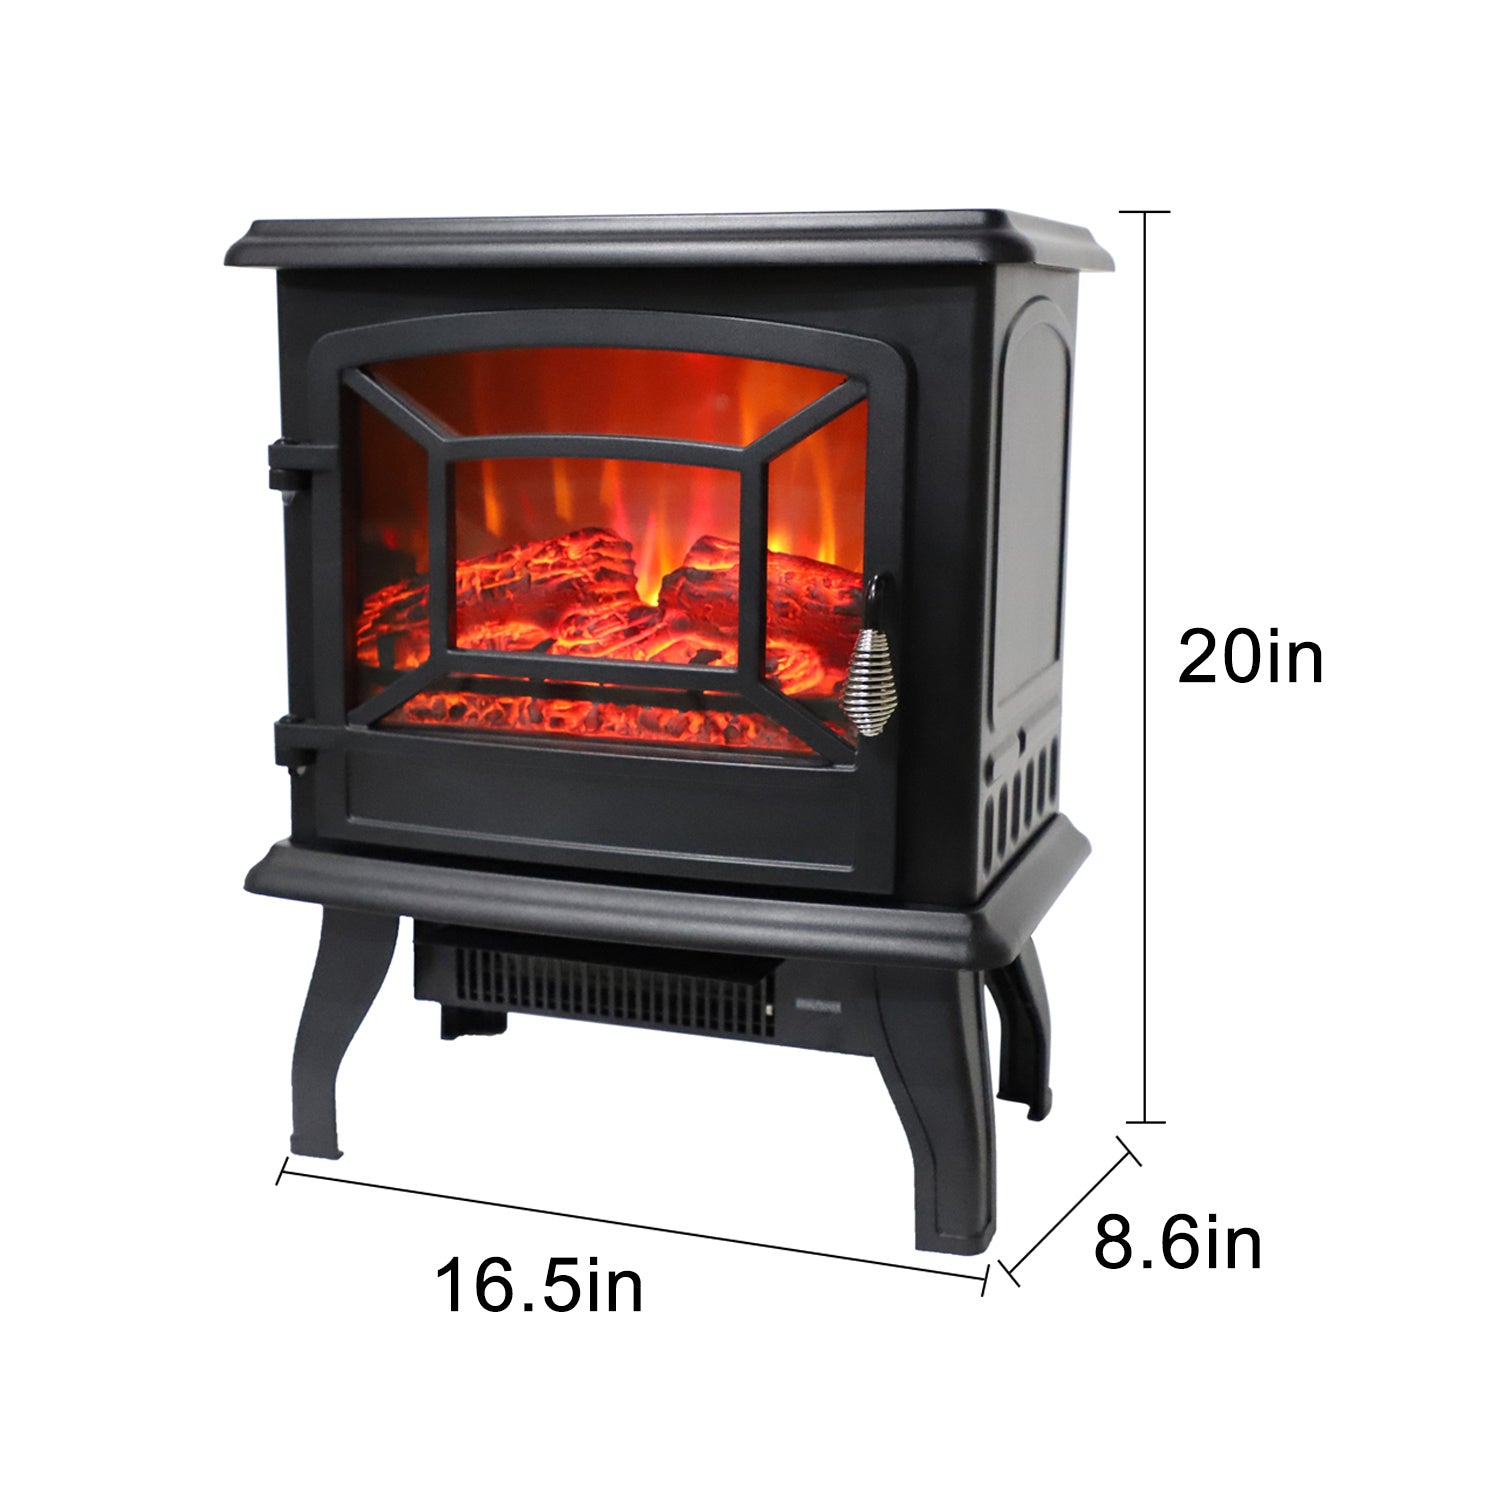 17 inch 1400w Freestanding Fireplace Fake Wood/Single Color/Heating Wire/A Rocker Flame Switch Button/a Rocker Heating Switch Button/a Temperature Control Knob with NTC/Black